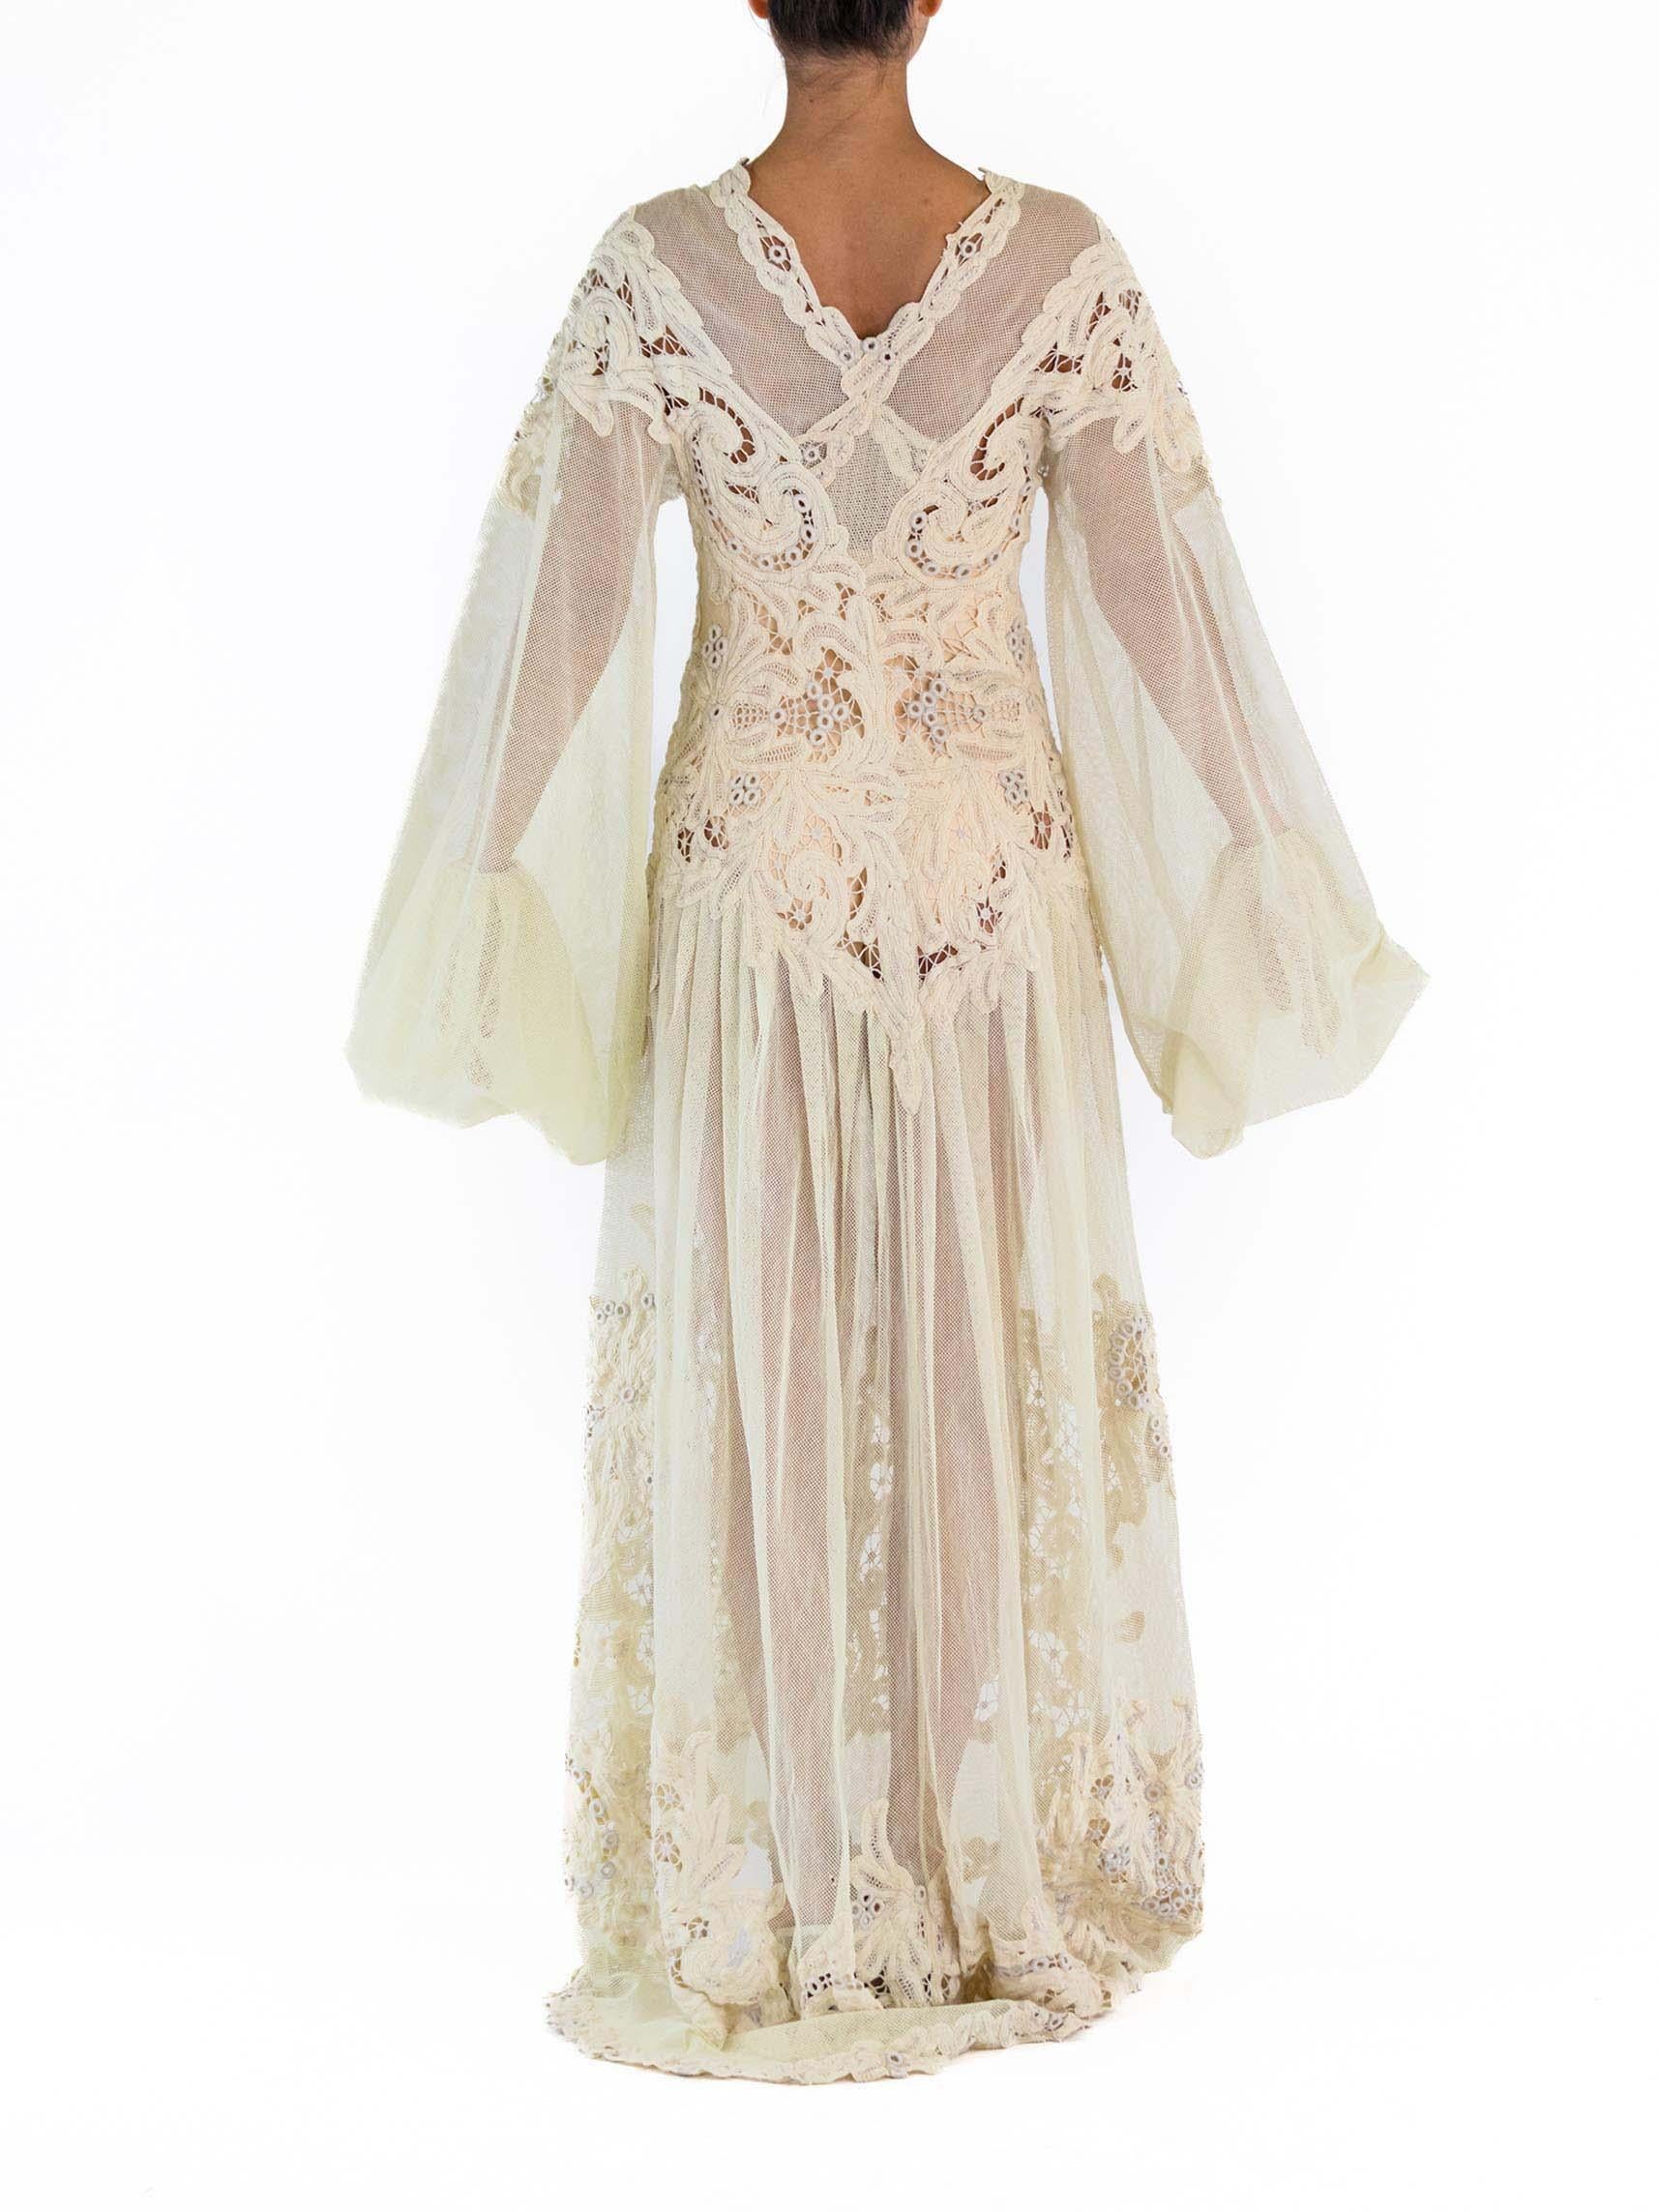 MORPHEW ATELIER Cream Cotton Net & Handmade Victorian Tape Lace Gown With Giant For Sale 2